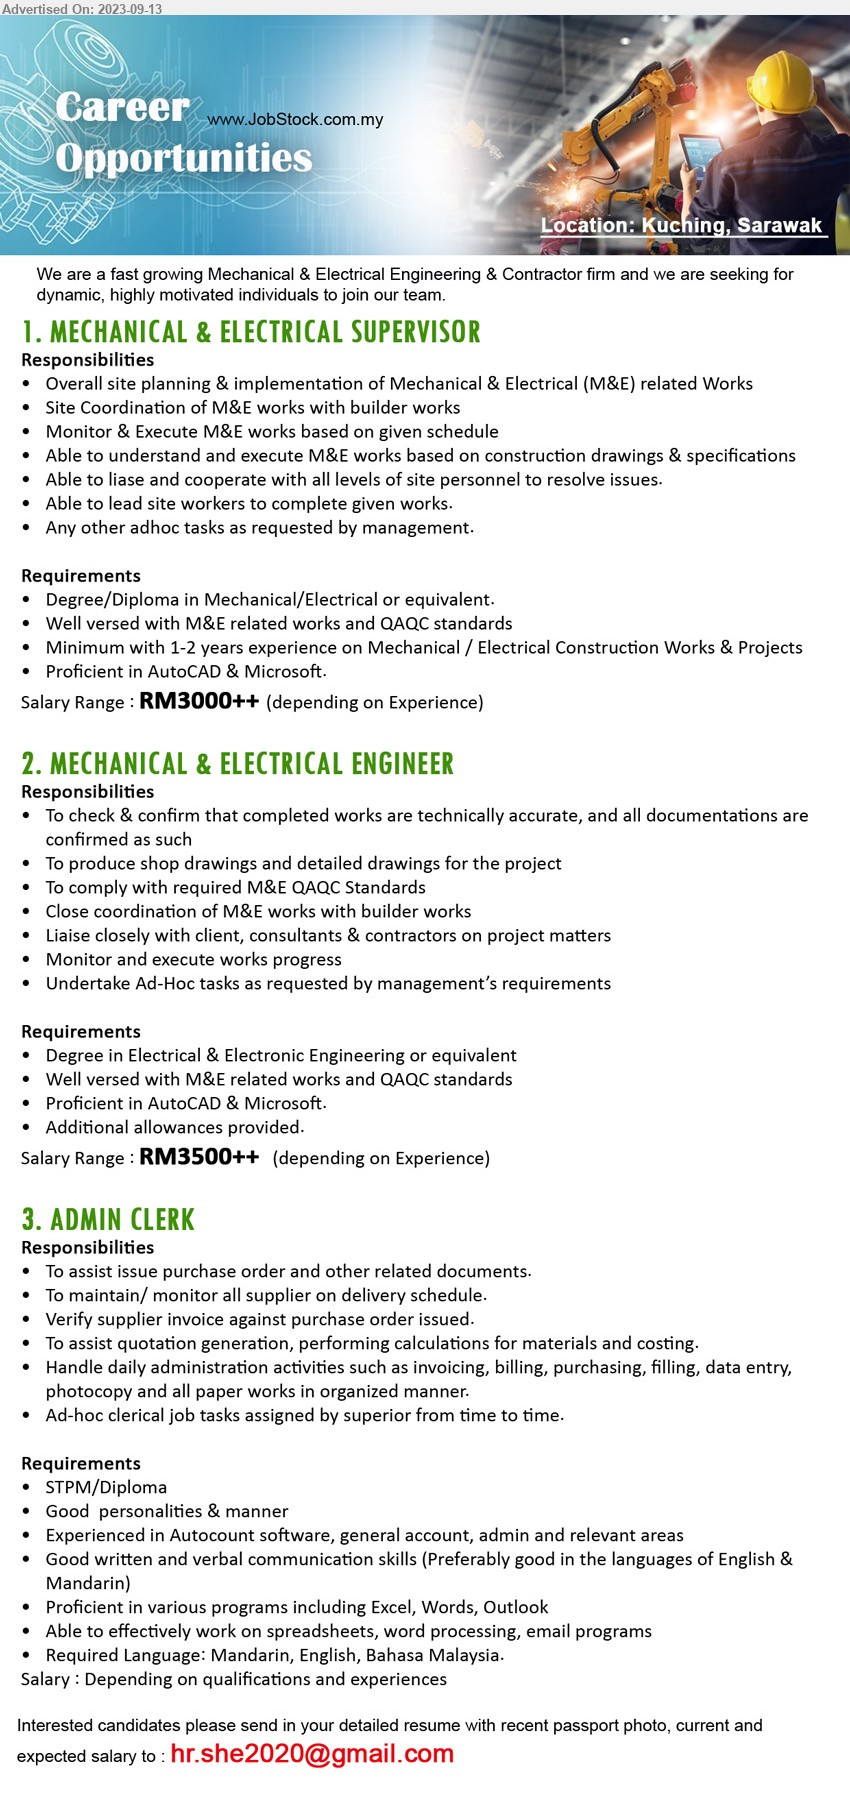 ADVERTISER (Mechanical & Electrical Engineering & Contractor firm) - 1. MECHANICAL & ELECTRICAL SUPERVISOR (Kuching), Salary Range : RM3000++, Degree/Diploma in Mechanical/Electrical, Well versed with M&E related works and QAQC standards,...
2. MECHANICAL & ELECTRICAL ENGINEER (Kuching), Salary Range : RM3500++, Degree in Electrical & Electronic Engineering,...
3. ADMIN CLERK (Kuching), STPM/Diploma, Experienced in Autocount software, general account, admin and relevant areas,...
Email resume to ...